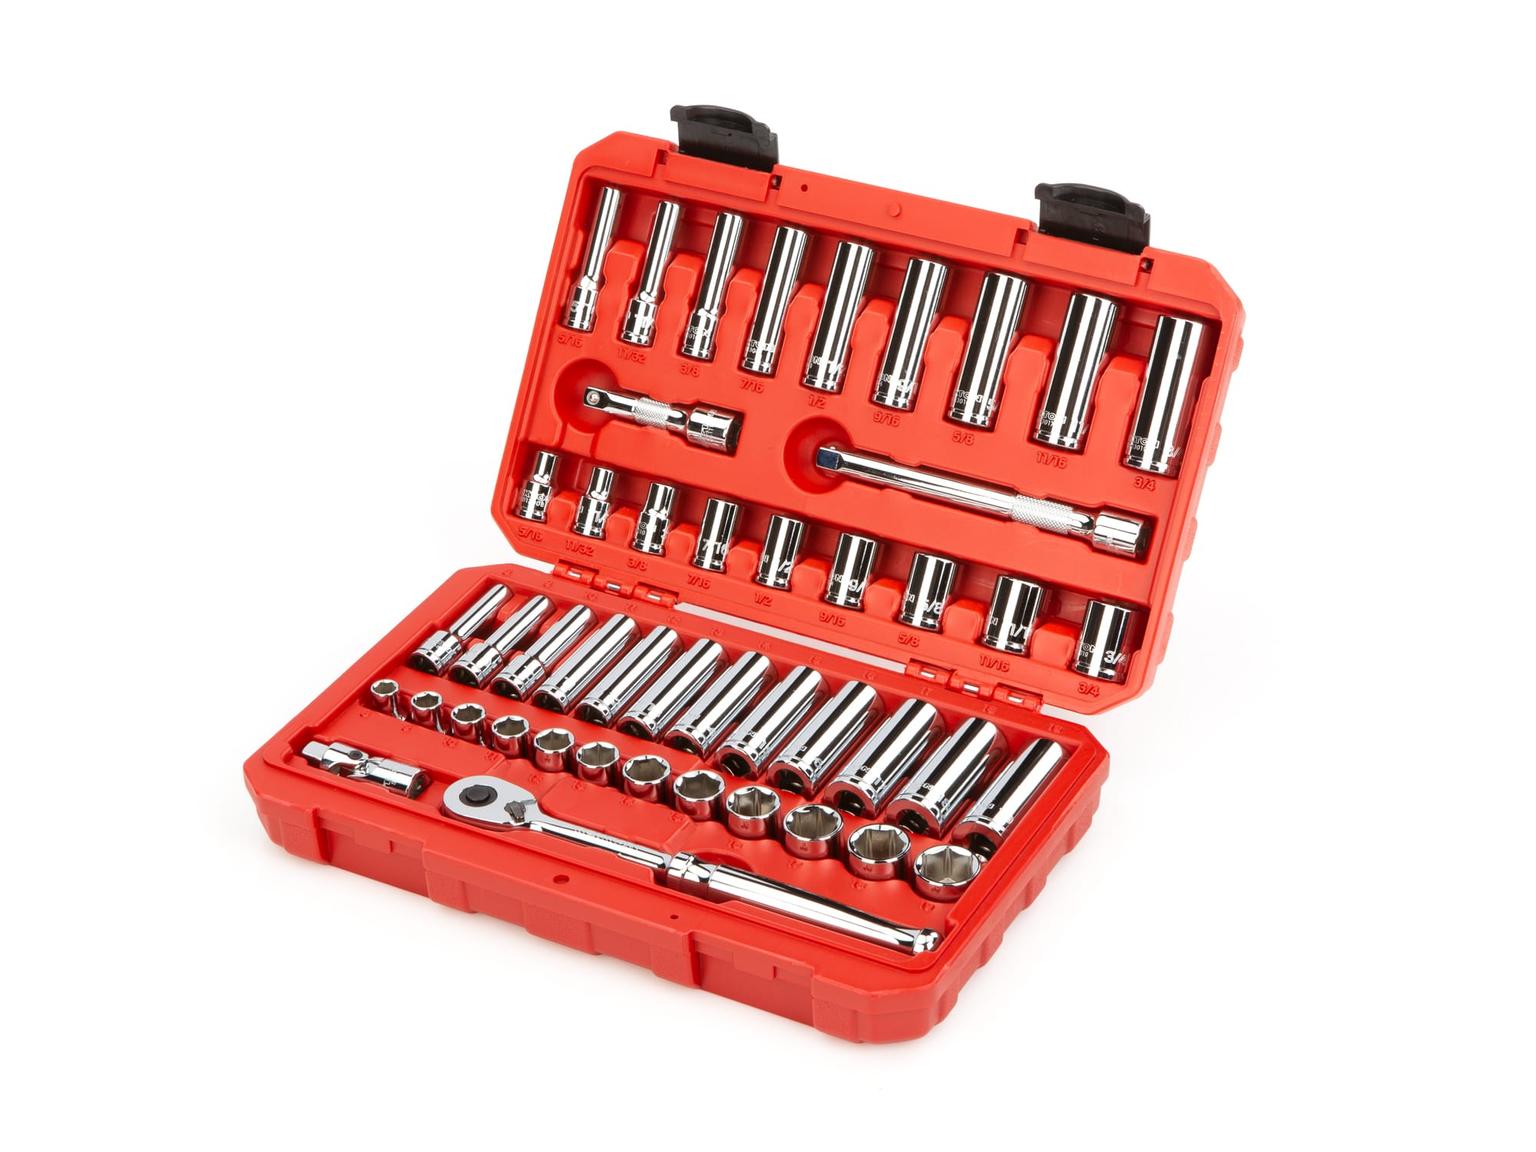 TEKTON SKT15301-D 3/8 Inch Drive 6-Point Socket and Ratchet Set, 46-Piece (5/16-3/4 in., 8-19 mm)